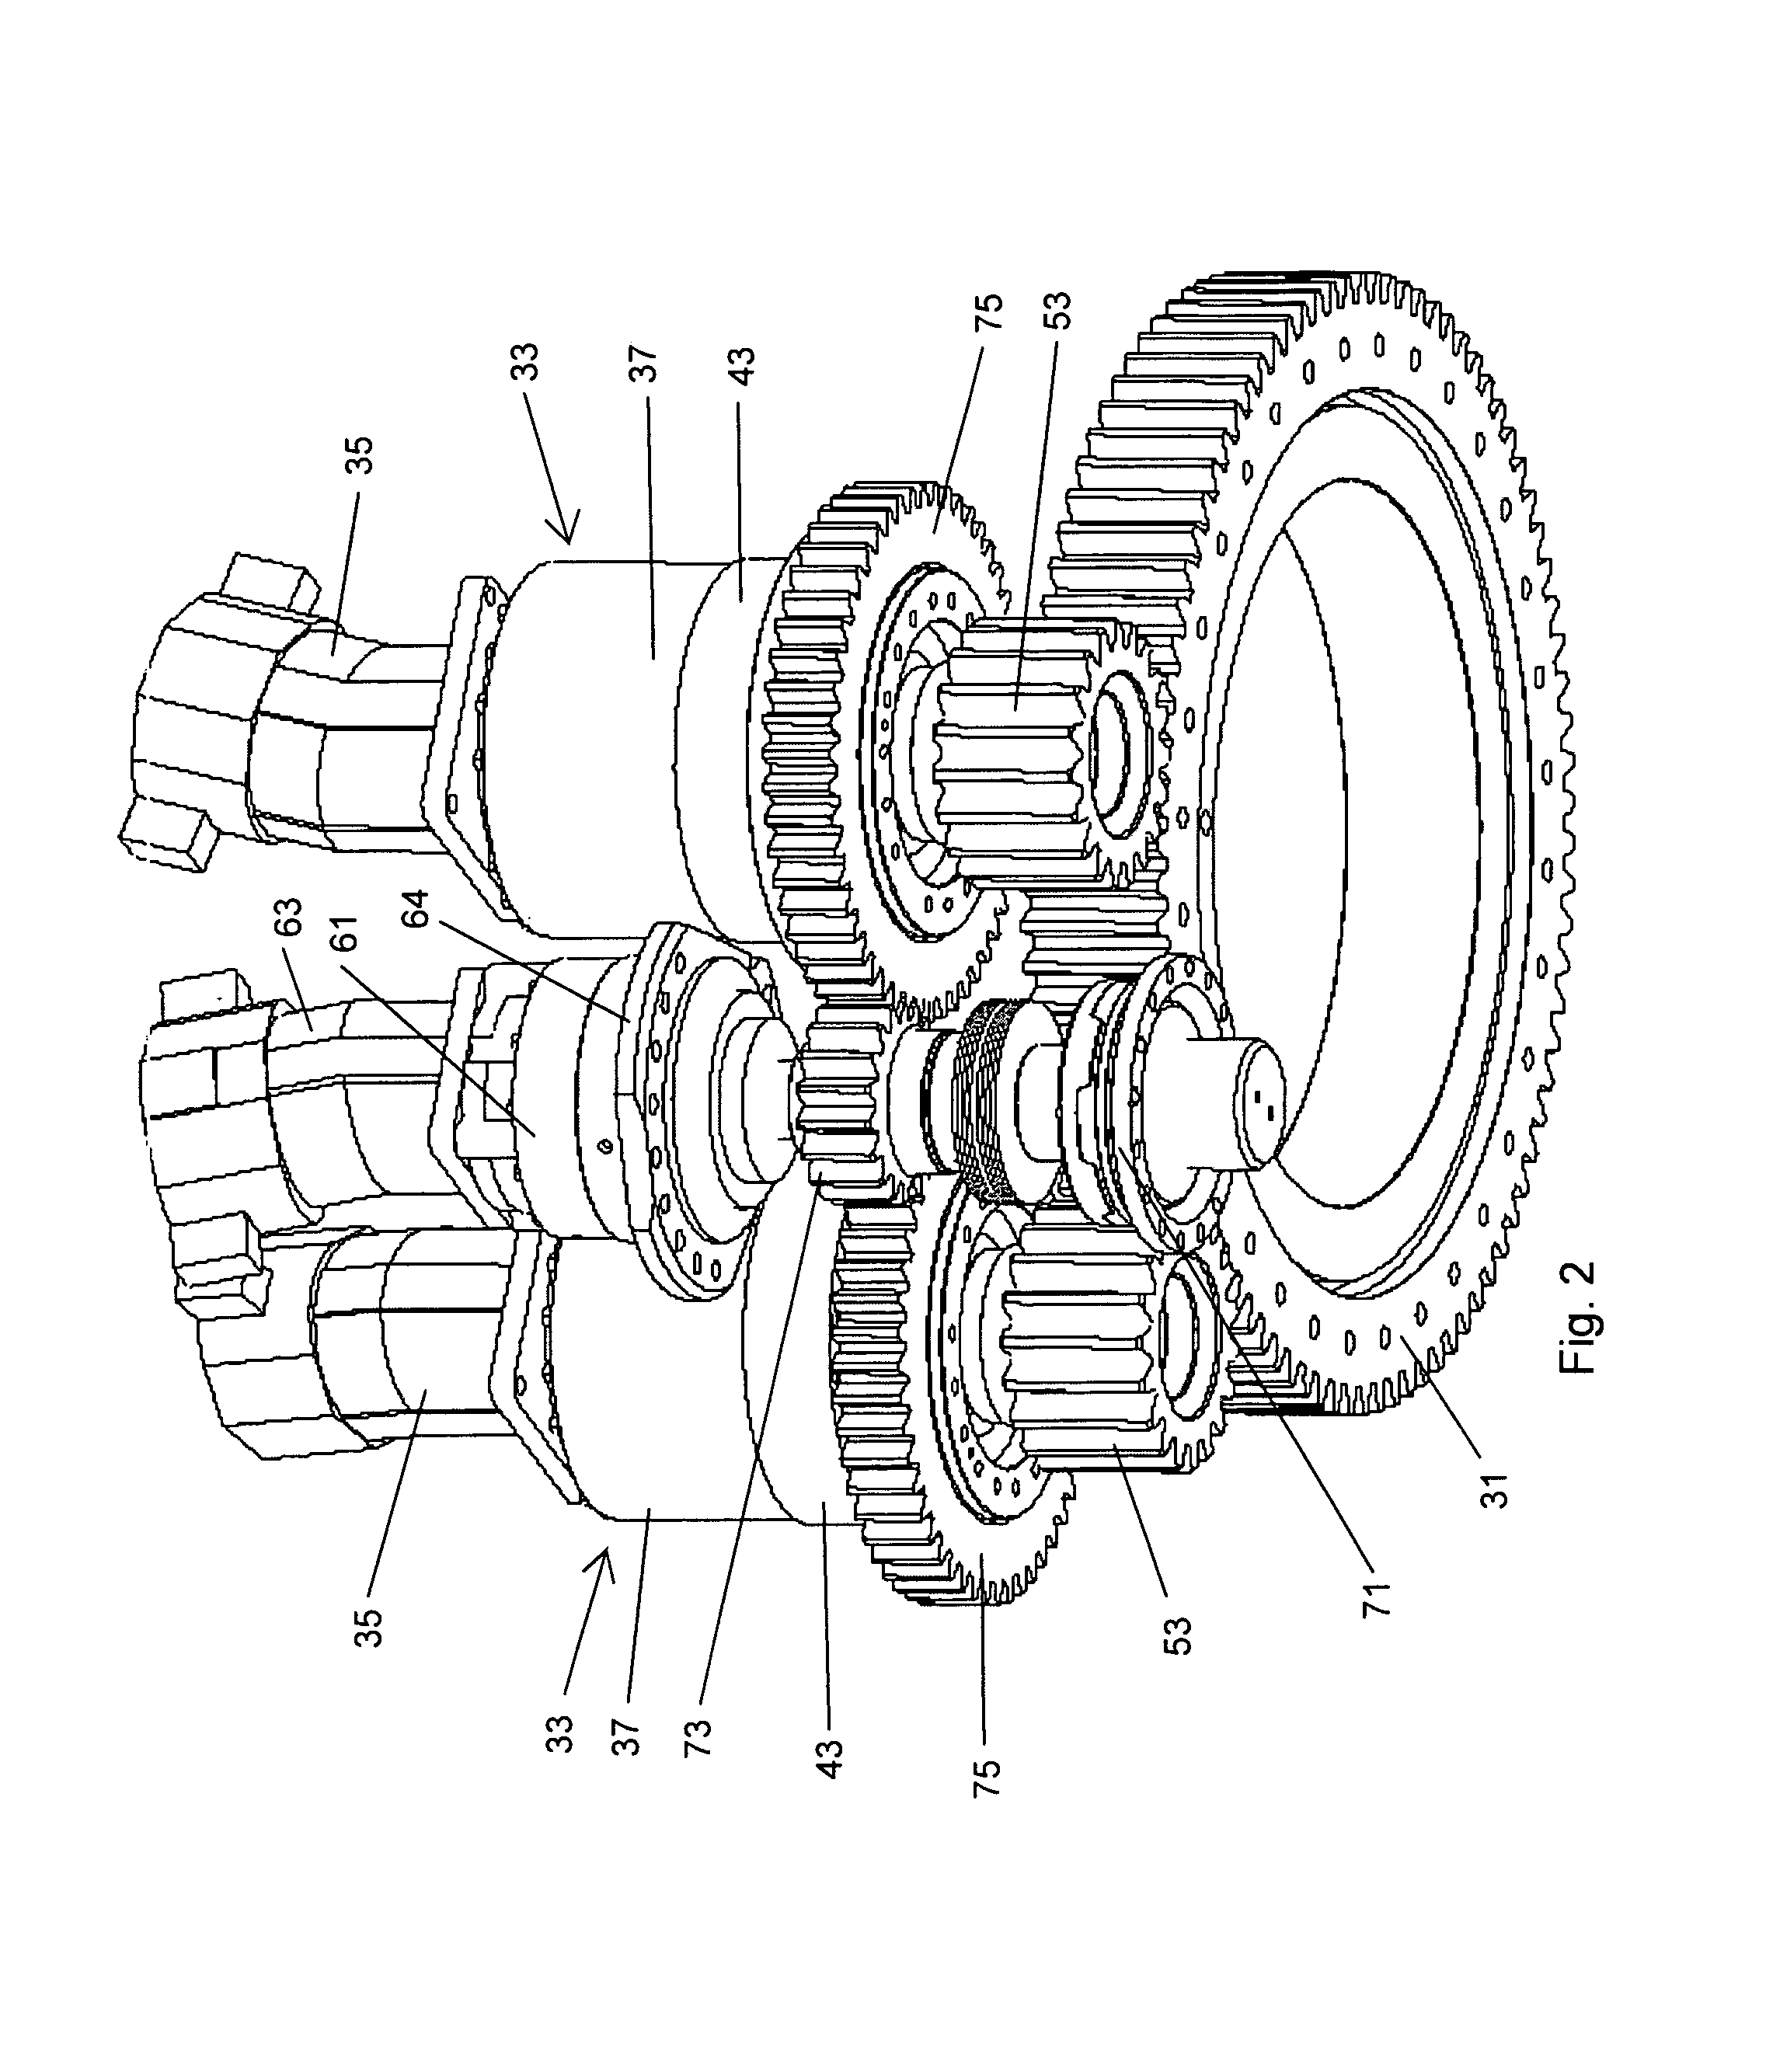 Foundation drilling apparatus and method with continuously variable hydraulic differential rotary table